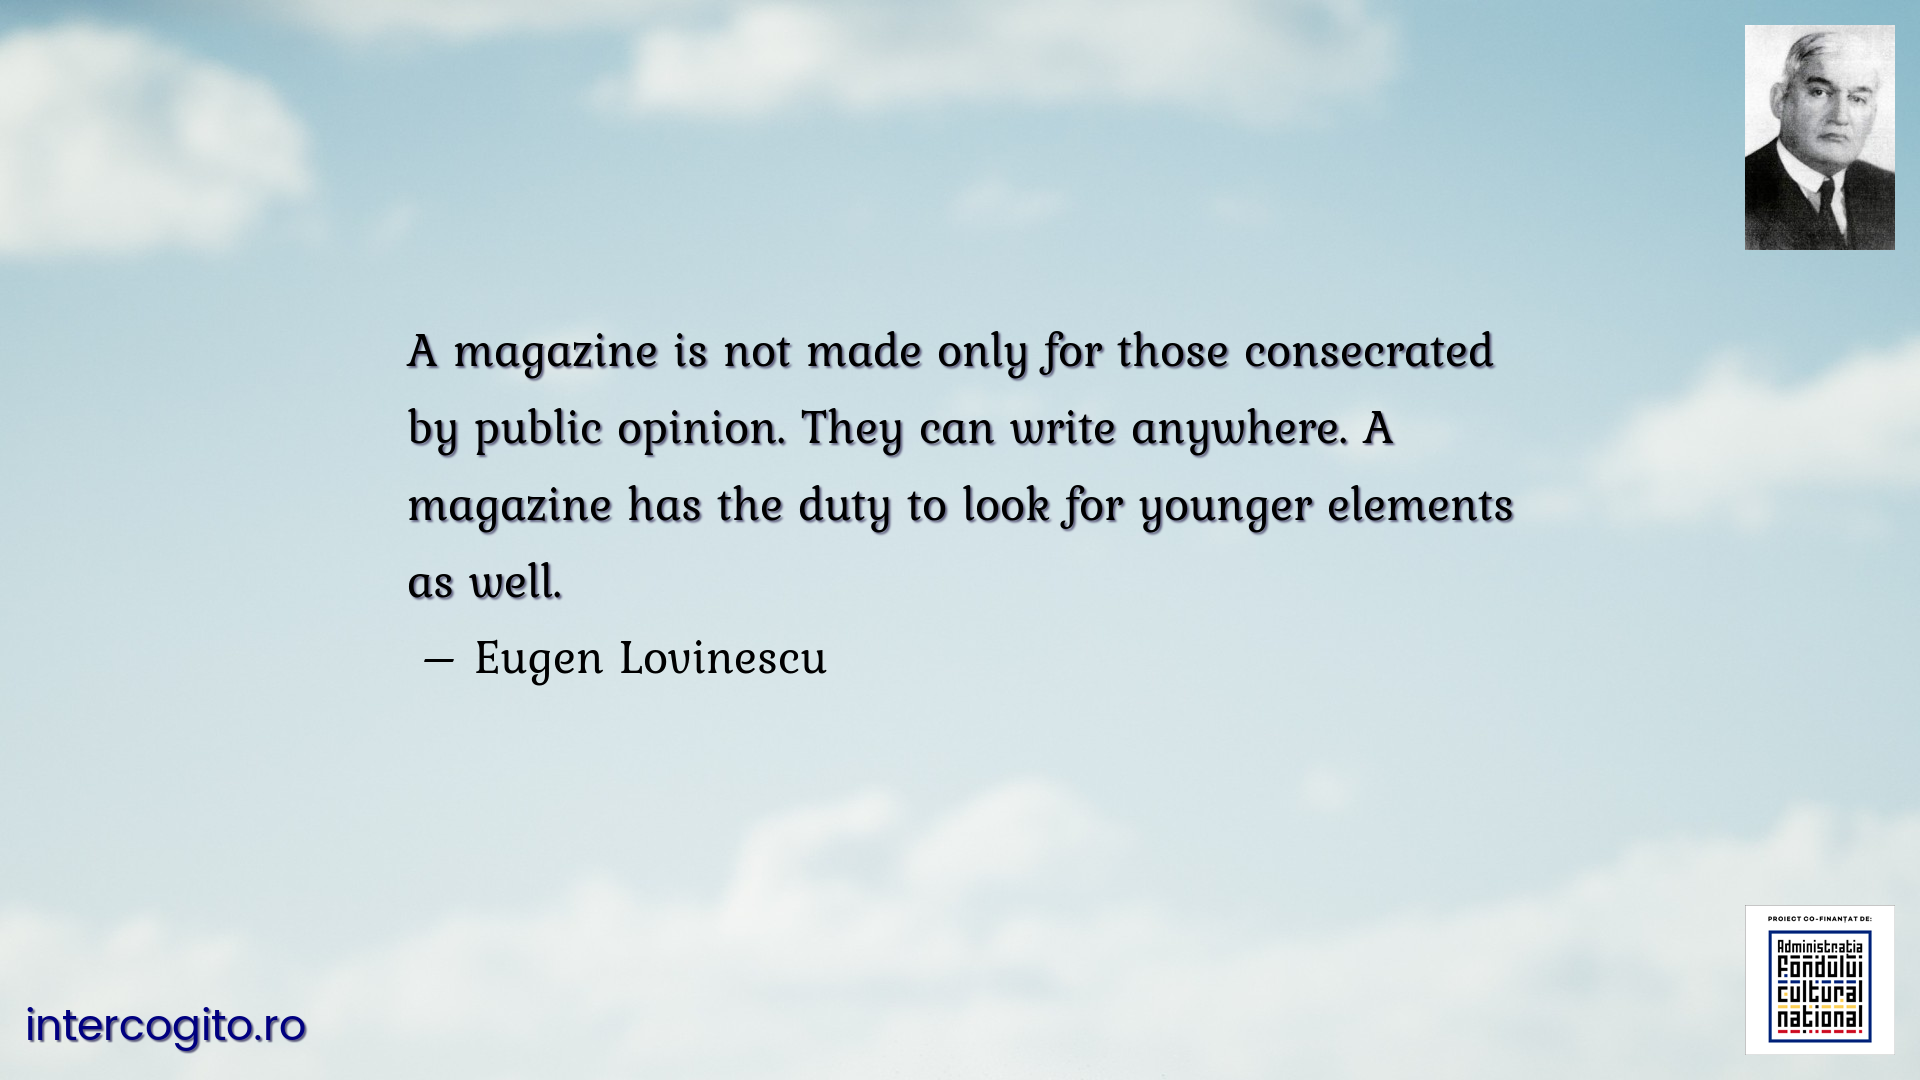 A magazine is not made only for those consecrated by public opinion. They can write anywhere. A magazine has the duty to look for younger elements as well.